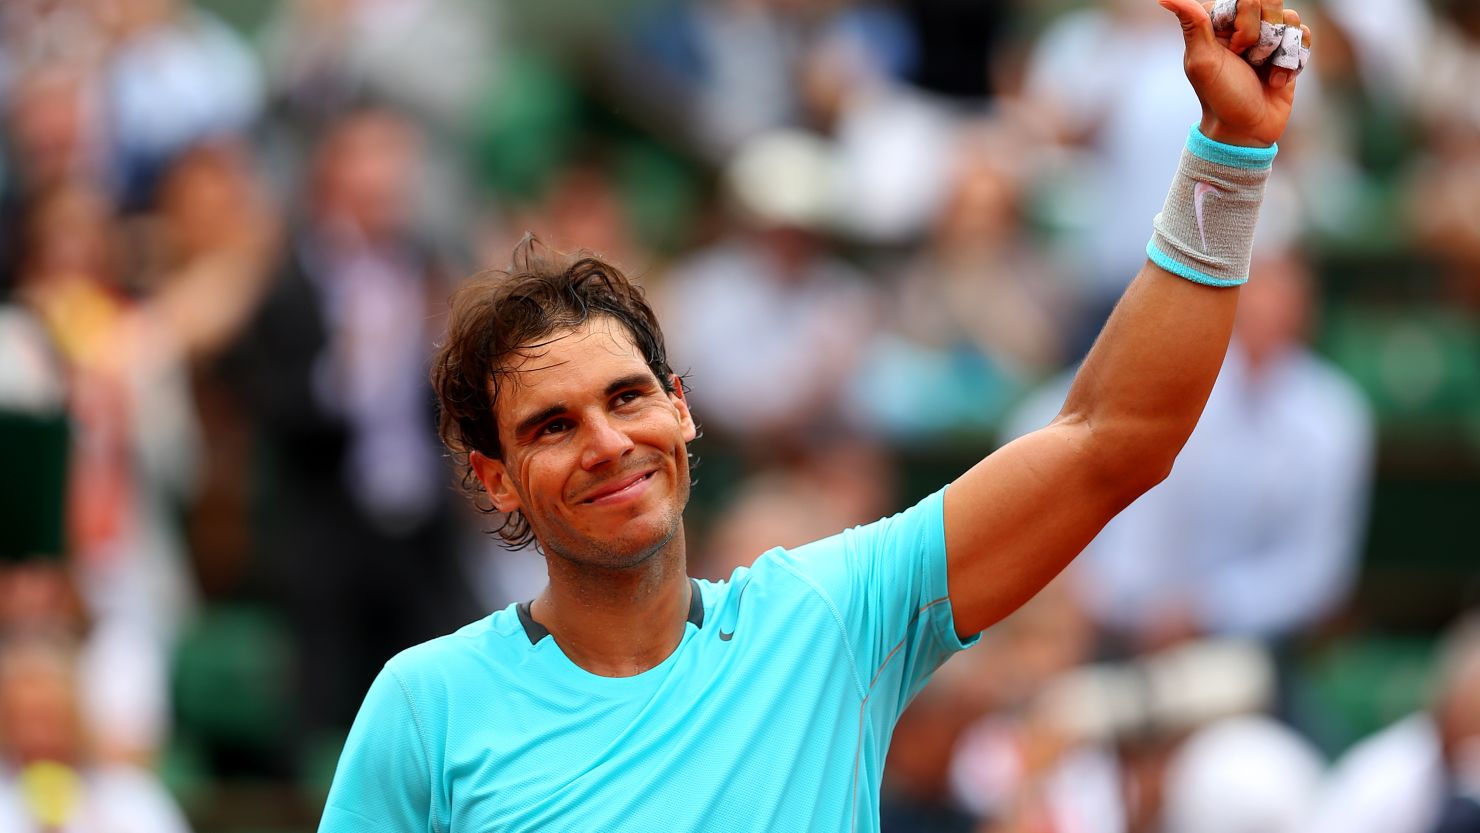 Rafael Nadal is aiming for a ninth French Open title at Roland Garros.